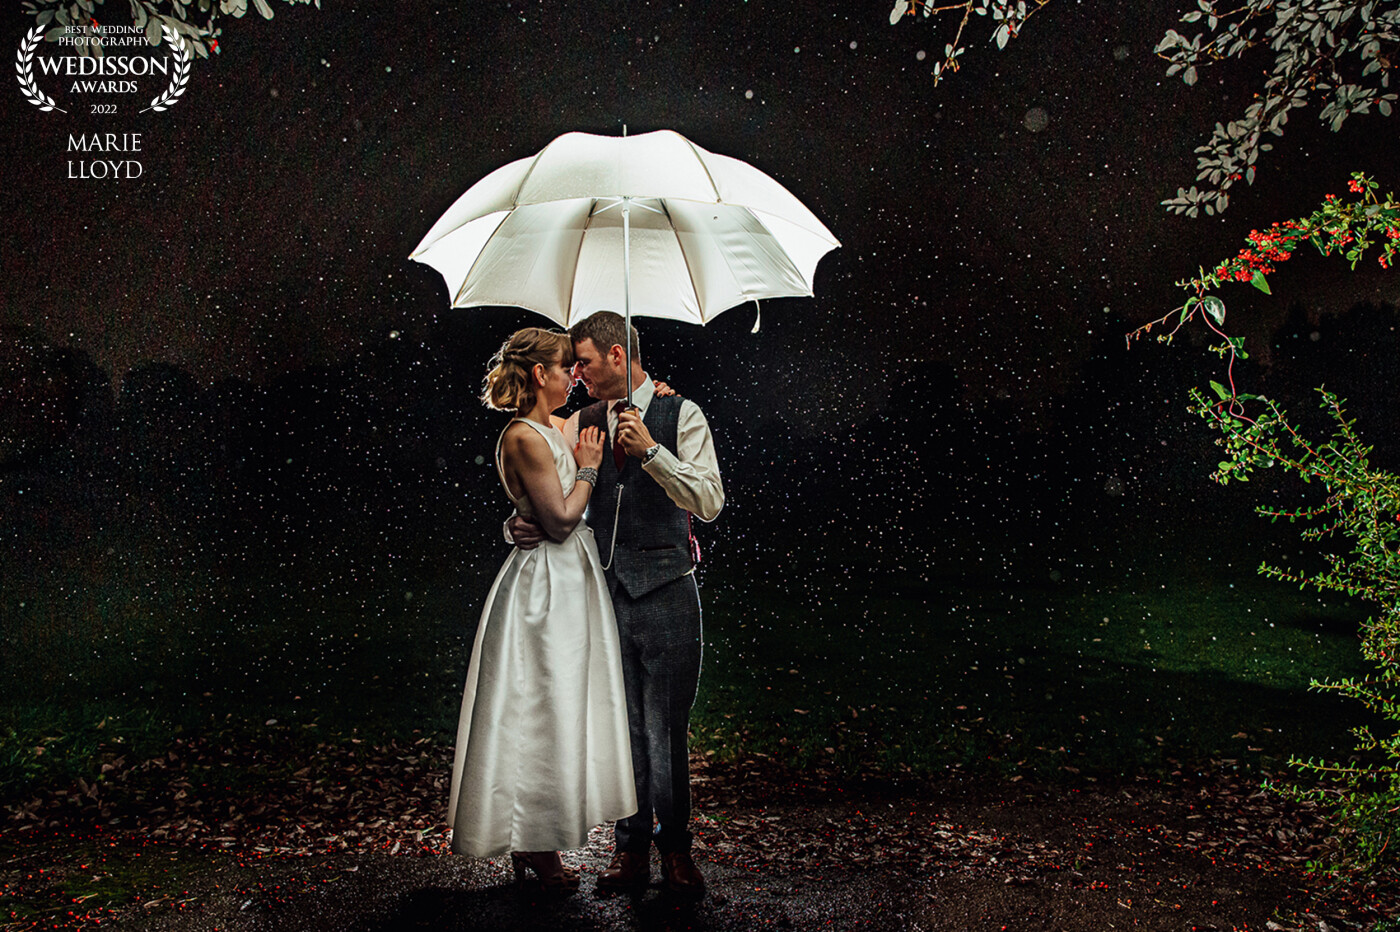 The couple was posed under an umbrella in the dark and lit with a Speedlight from behind pointing up at the umbrella, this, in turn, lit up the rain. The foliage was used as a frame